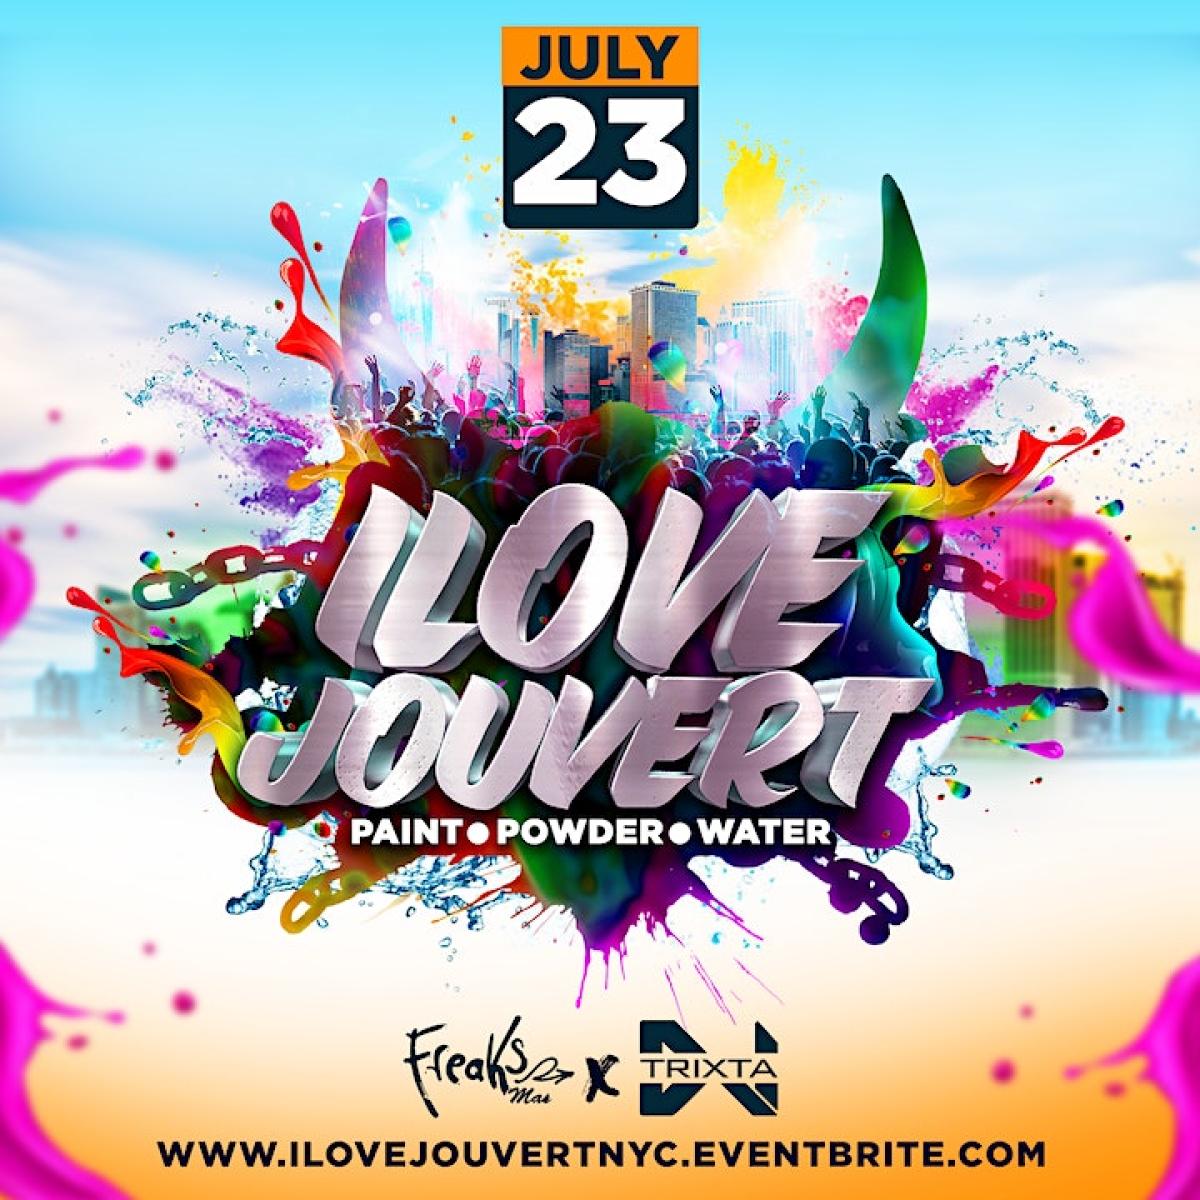 I Love Jouvert flyer or graphic.